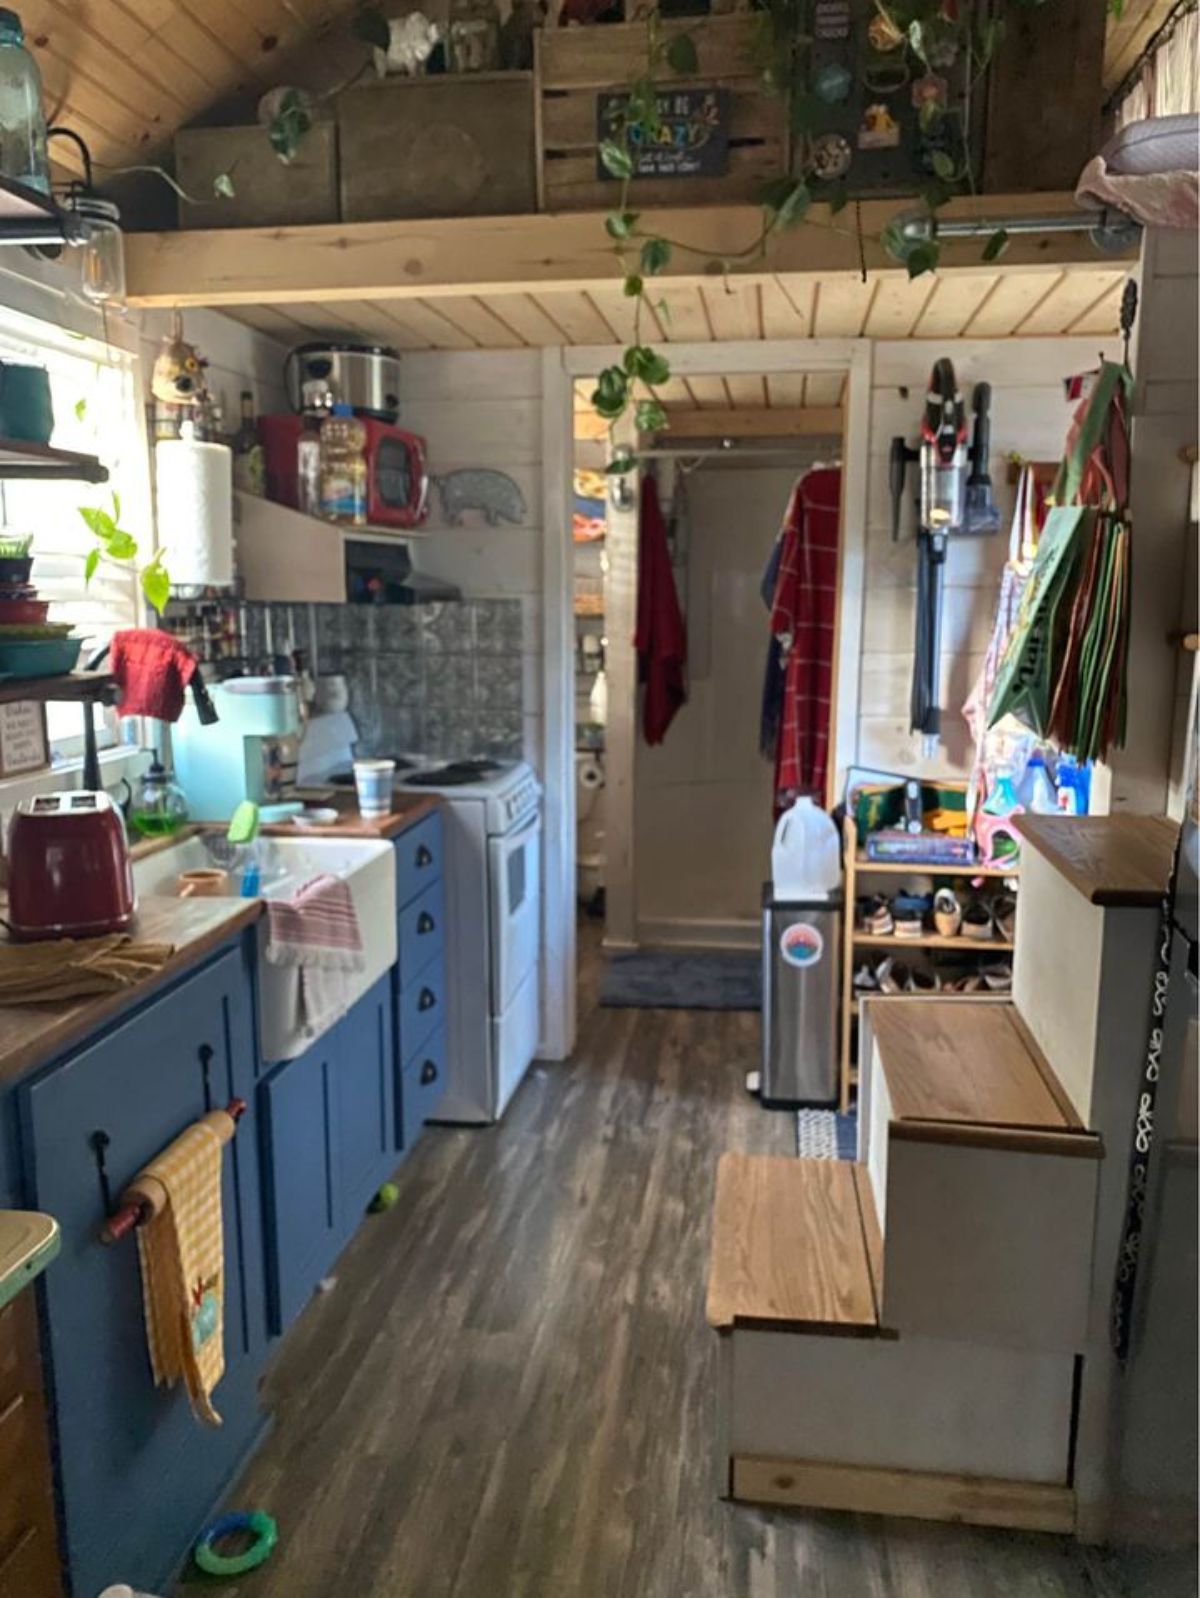 Kitchen area of 198 sf Tiny Cottage is small but with lots of amenities